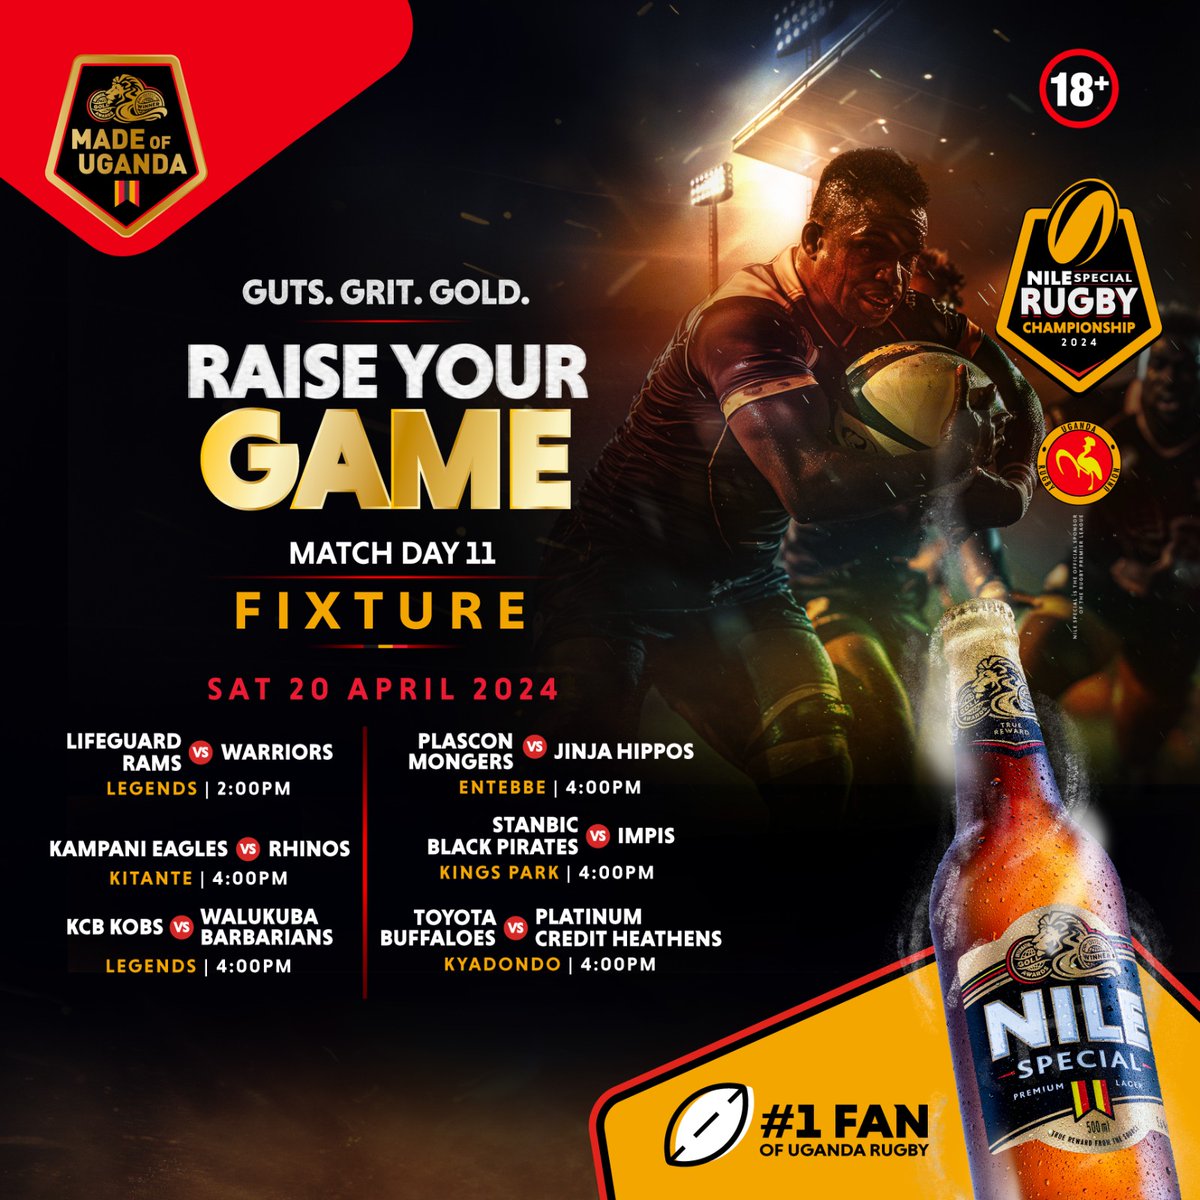 Match Day 11 of the Men's Nile Special Rugby Championship presents fire upon fire fixtures.Will it be the longest last lap? Don your club Jersey and be the 16th player on that pitch this weekend. #RaiseYourGame #GutsGritGold #NSRC2024